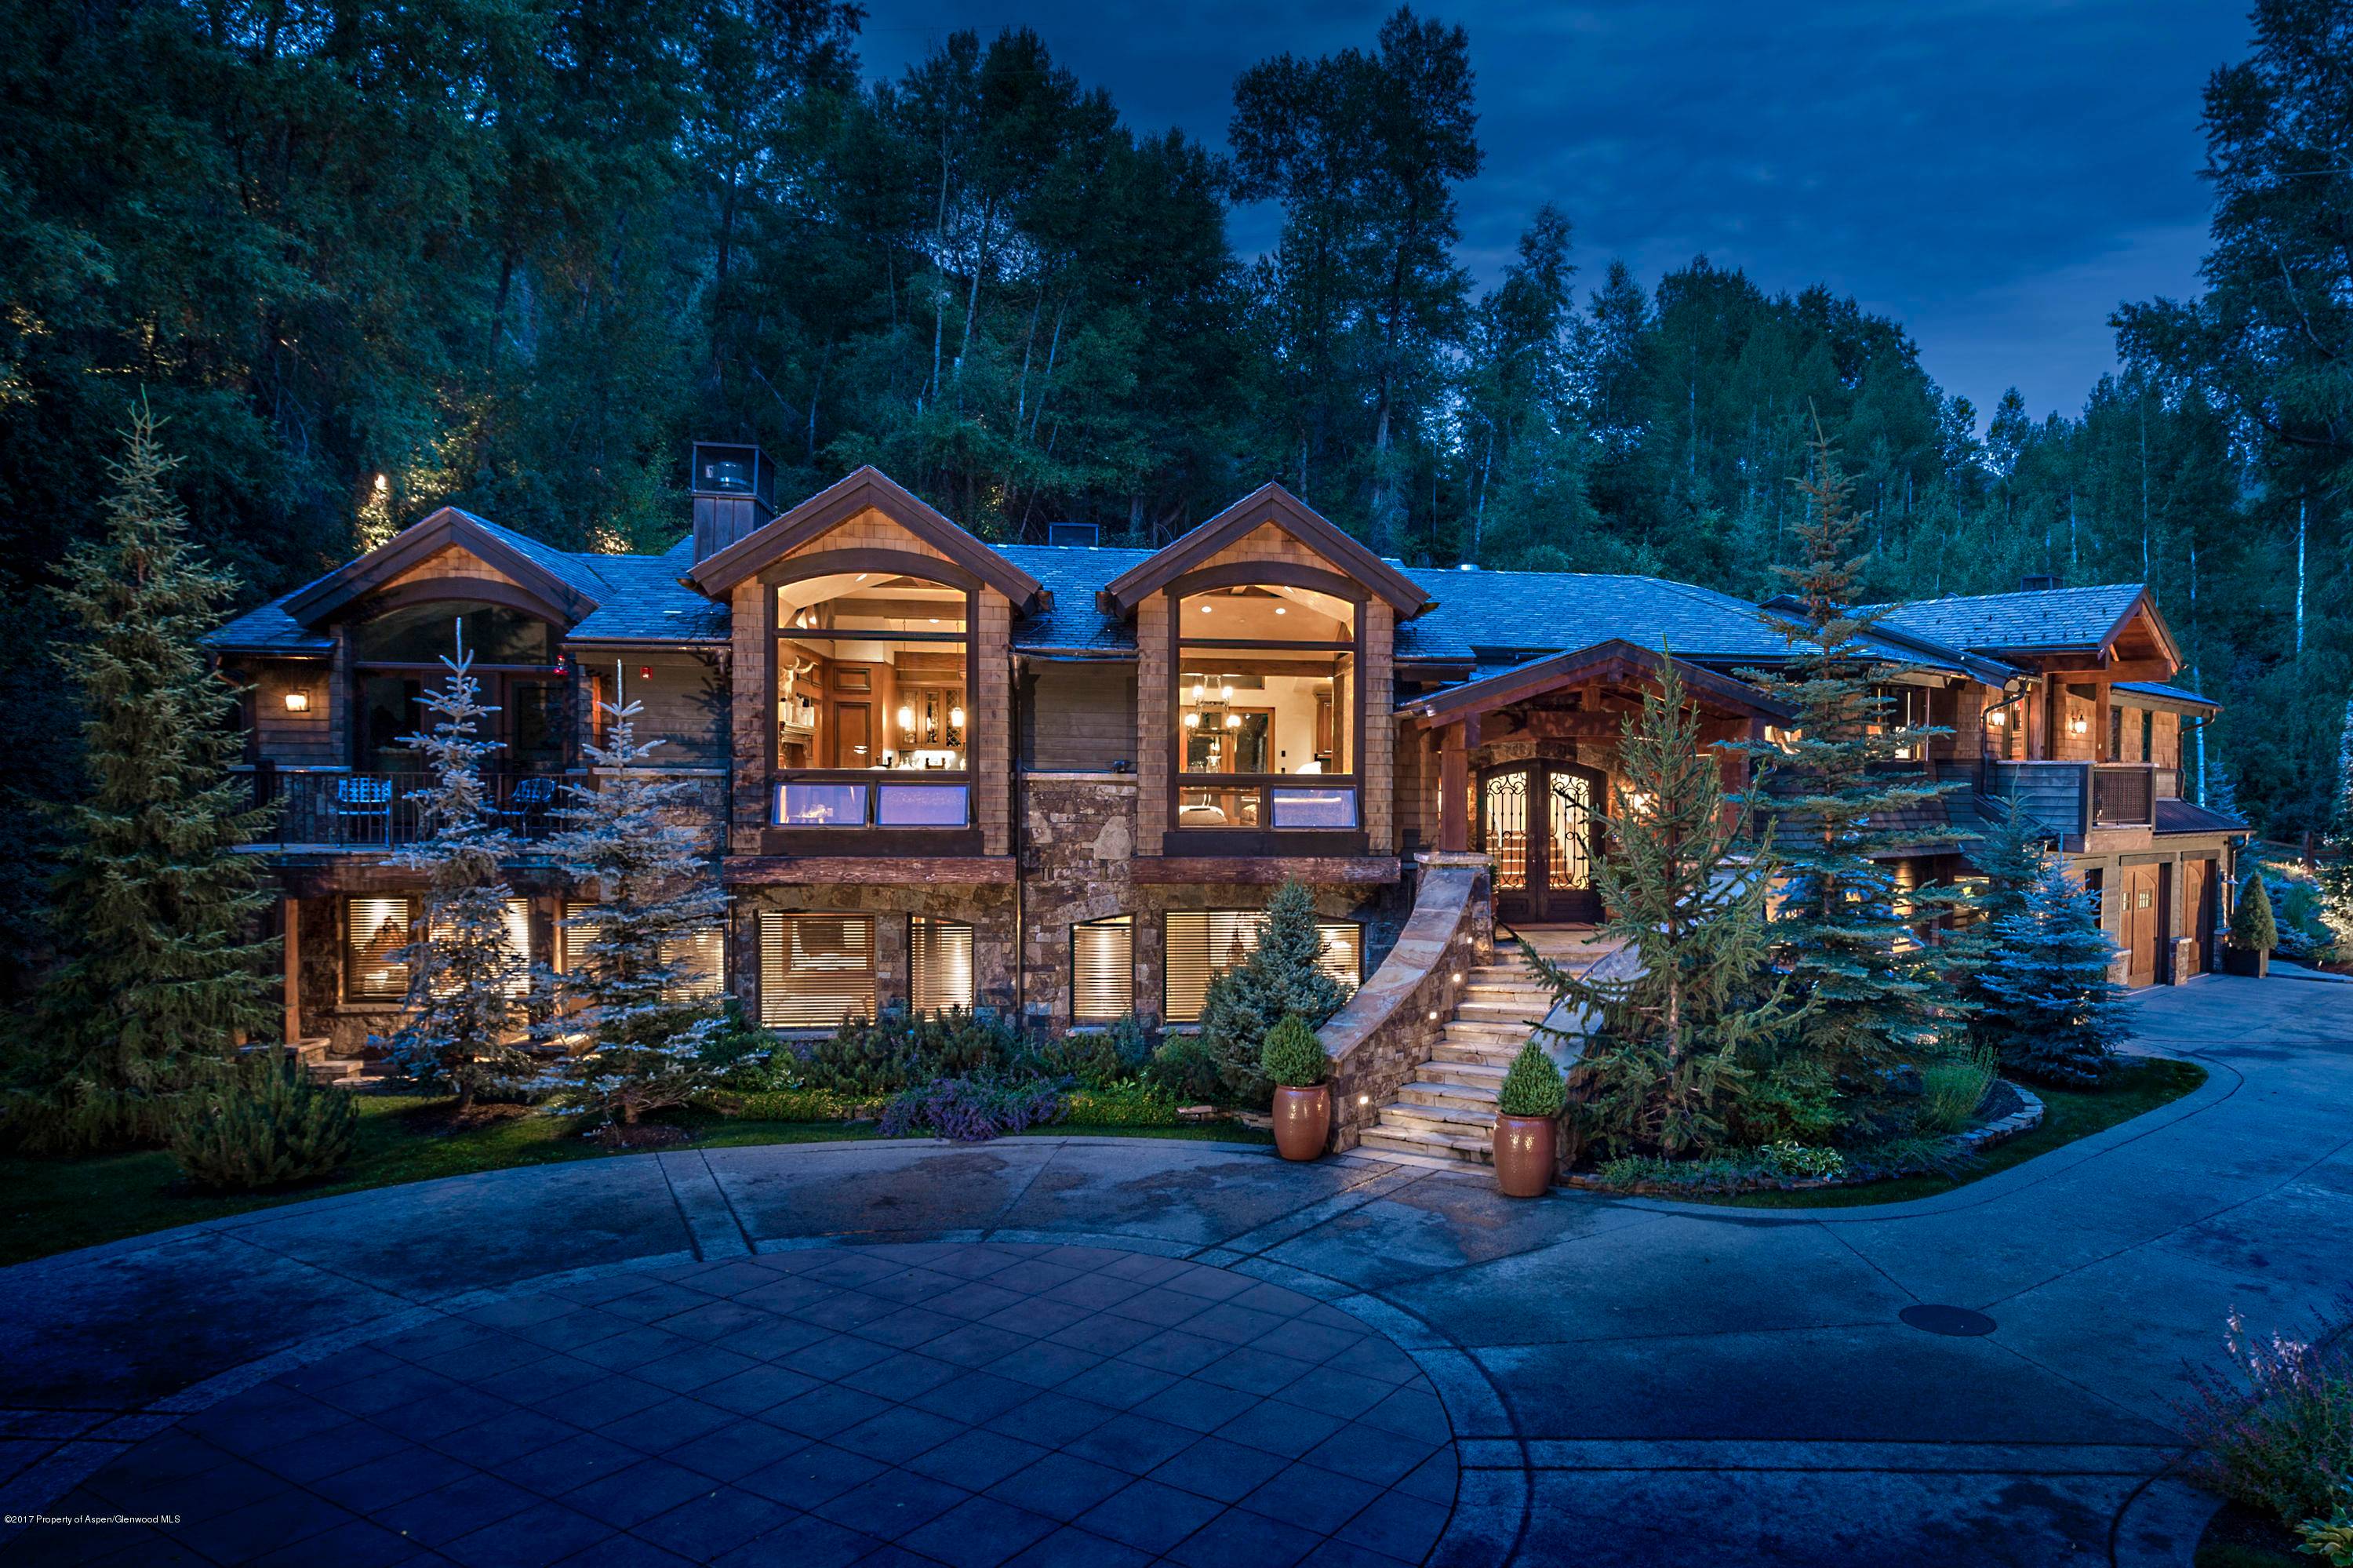 This exclusive Red Mountain estate is situated on a wooded nature wonderland in one of Aspen's most prestigious locations.